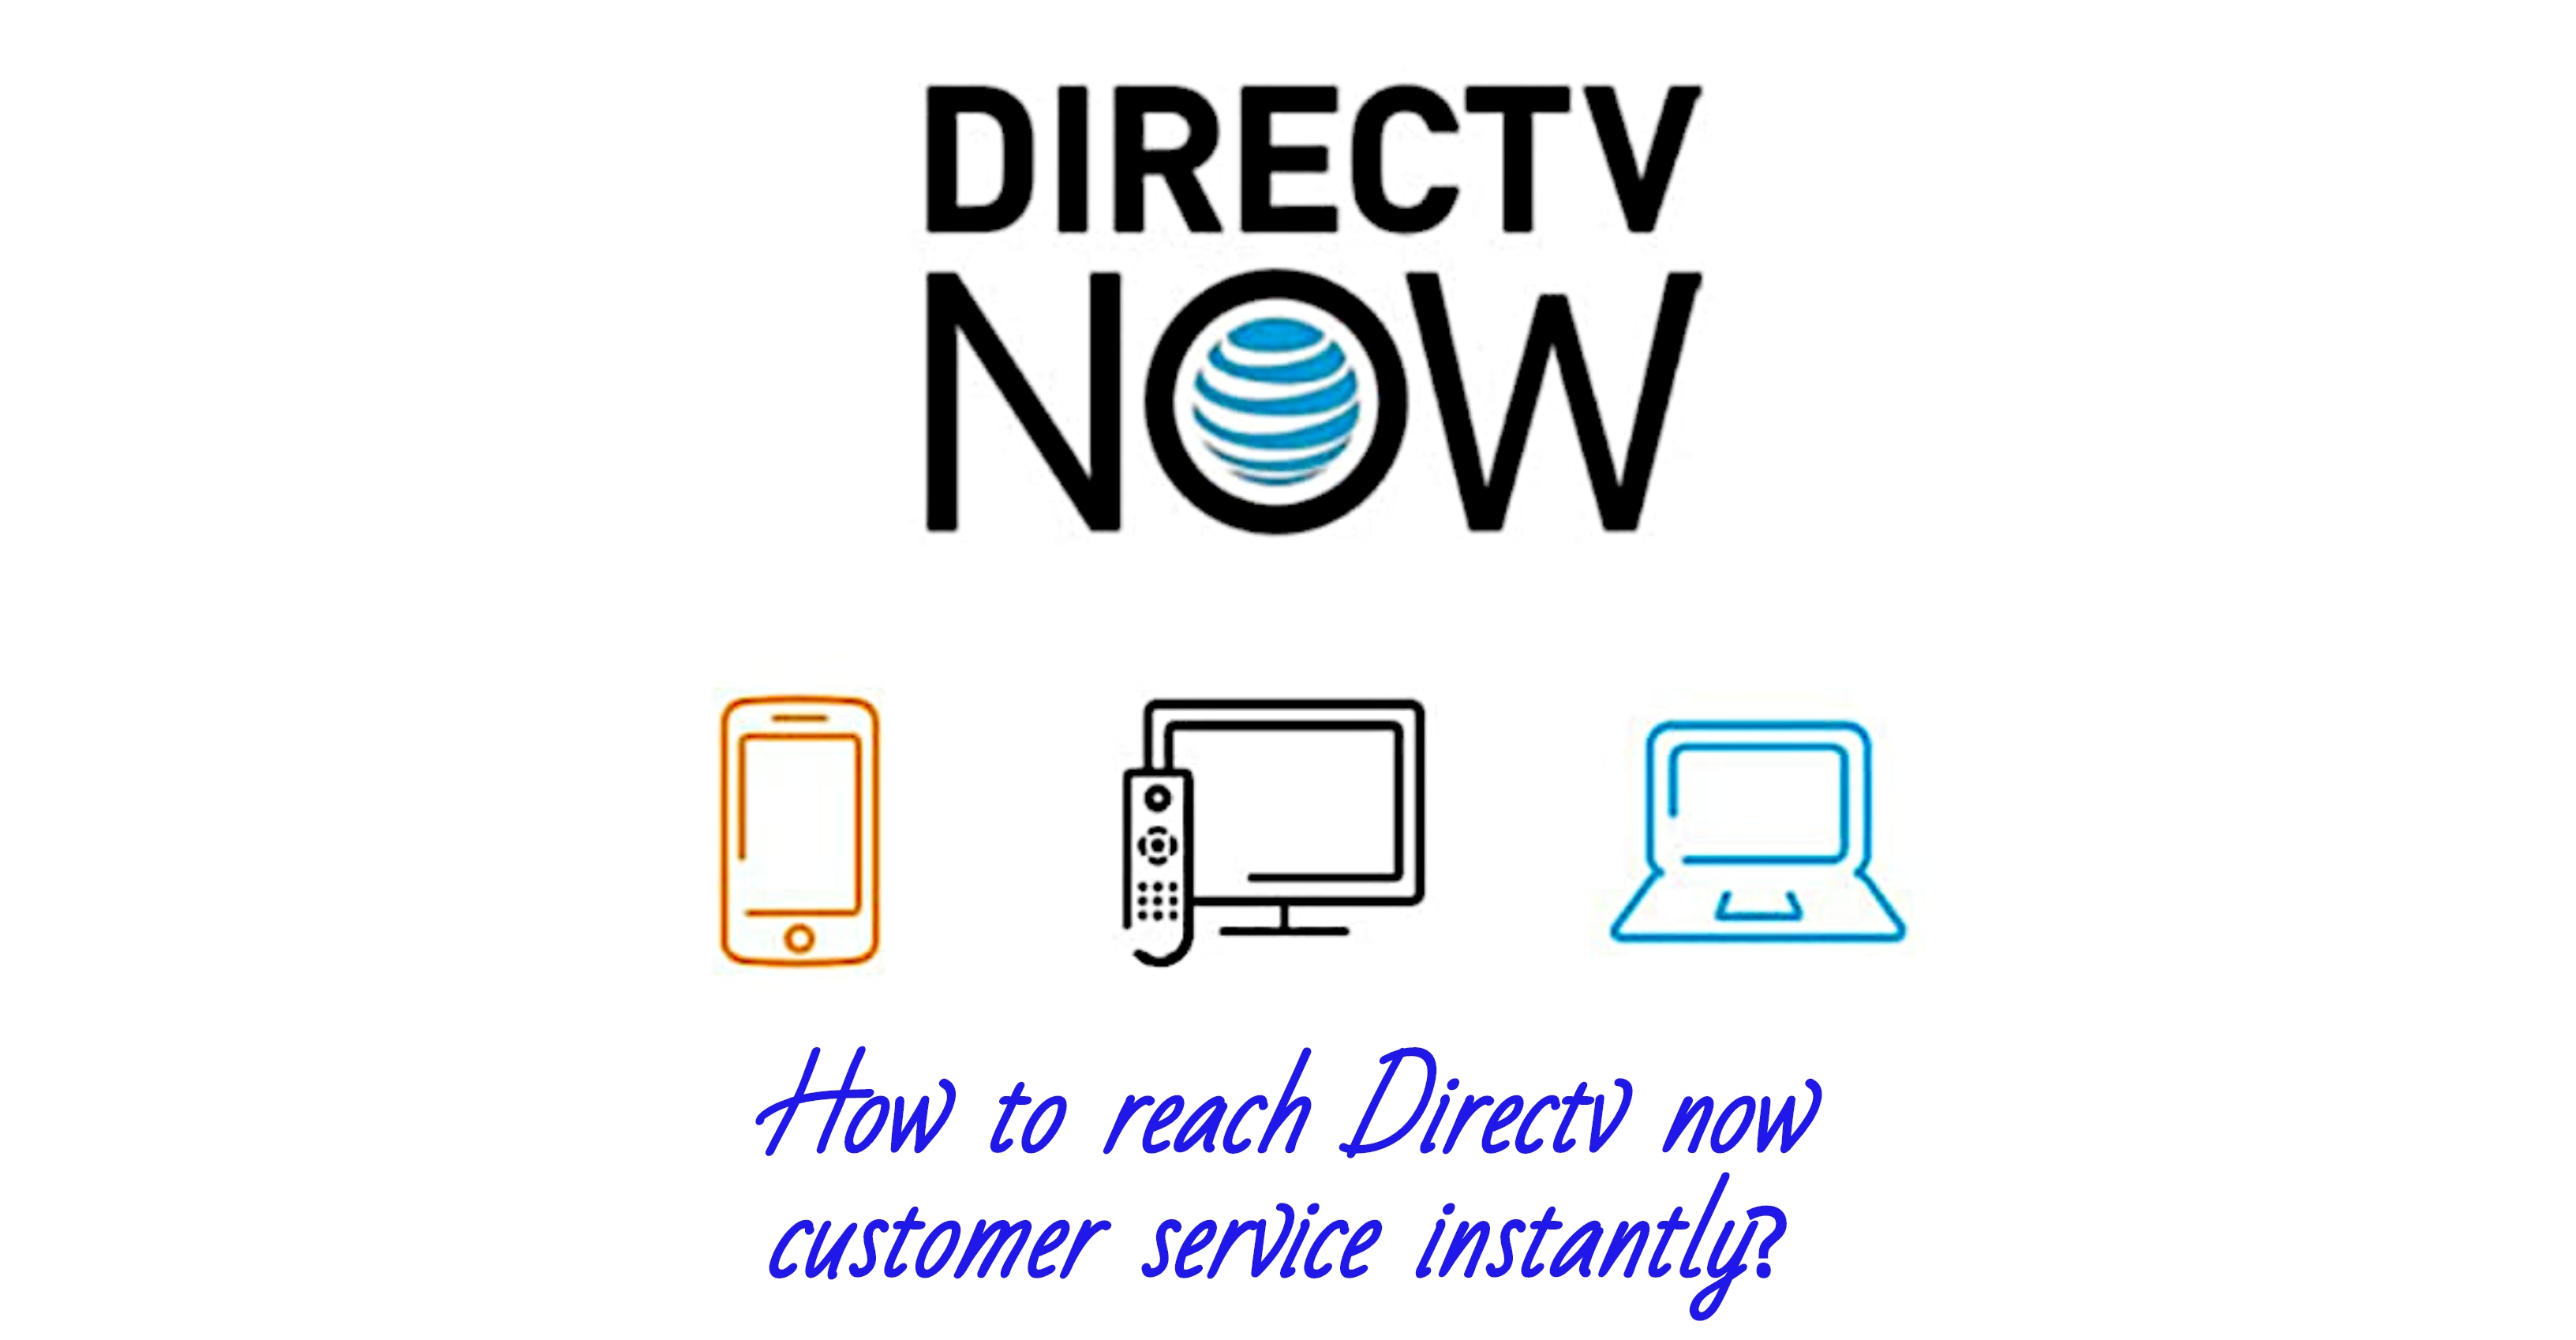 Directv Now Customer Service How To Reach Instantly?